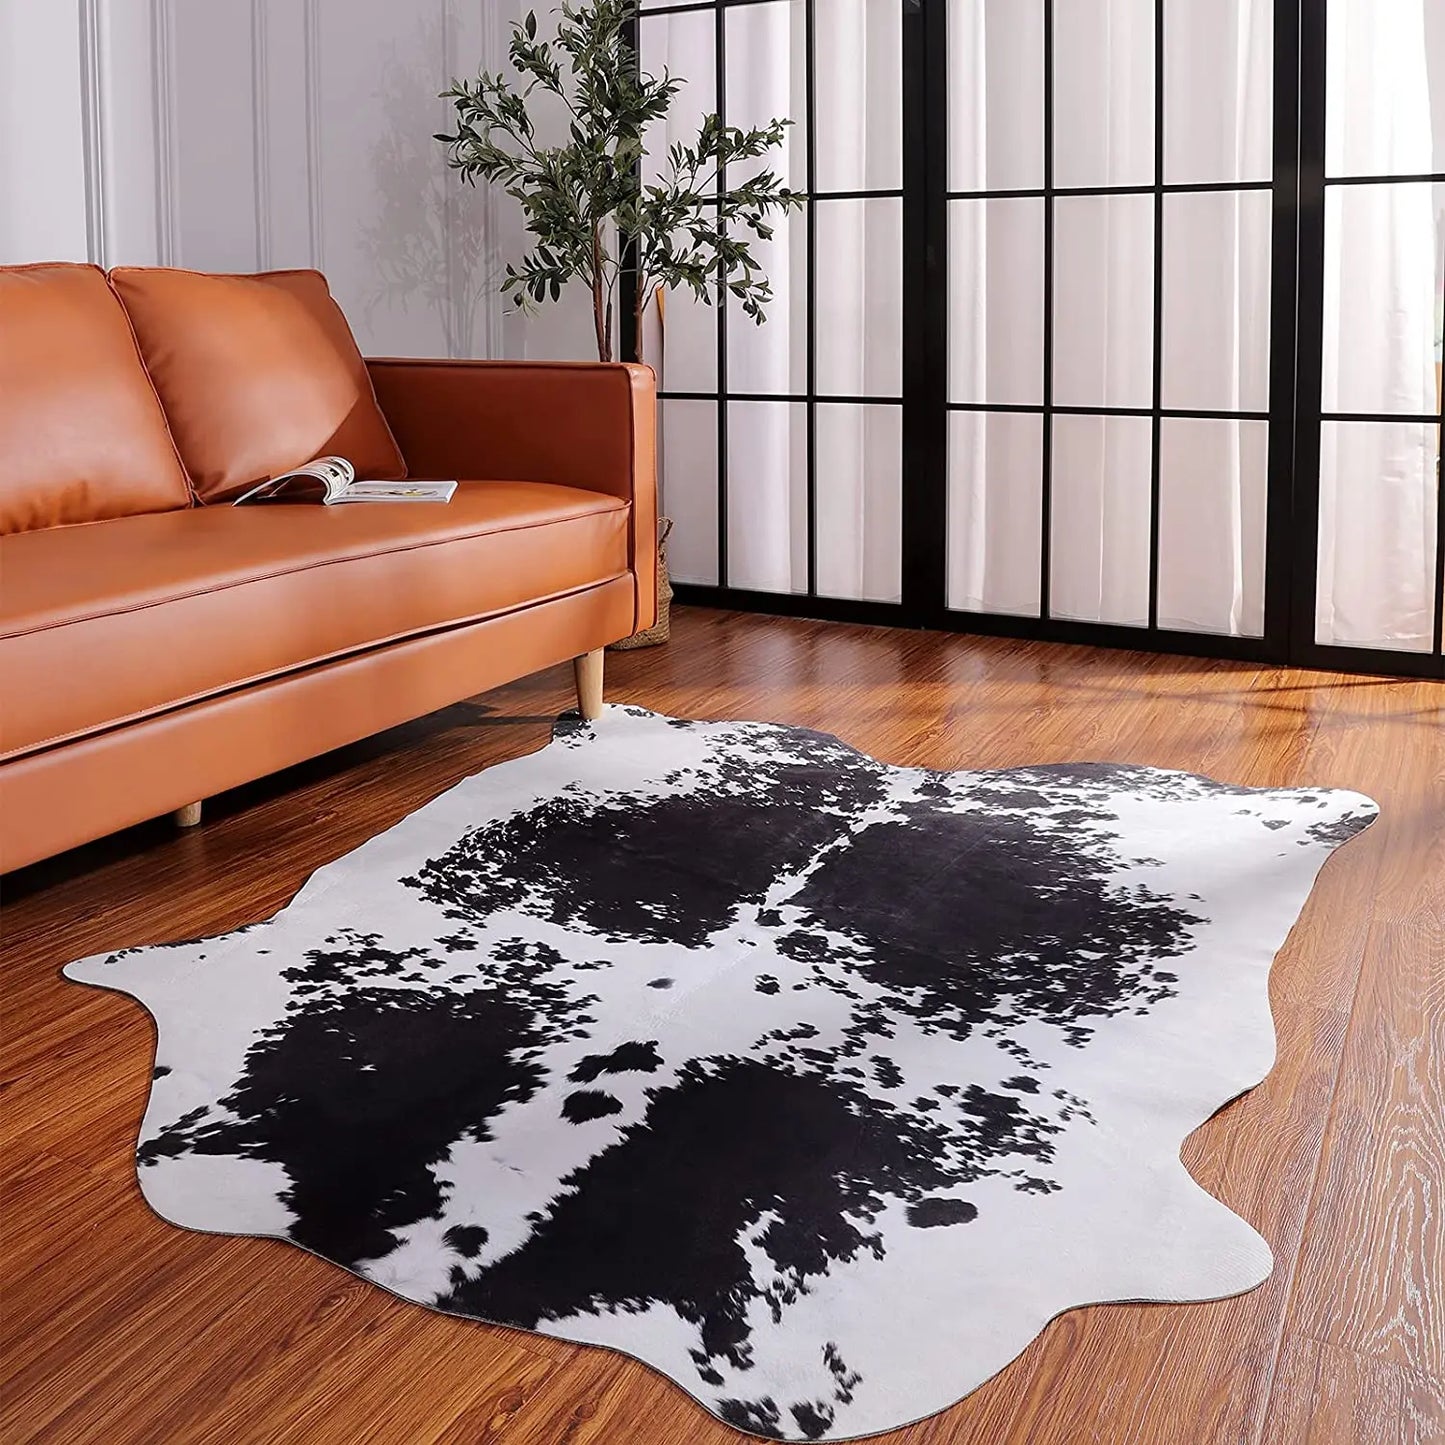 Imitation Cow Leather Area Rug Room Decor Carpet Industrial Style Carpets for Living Room Modern Rugs for Bedroom Floor Mats